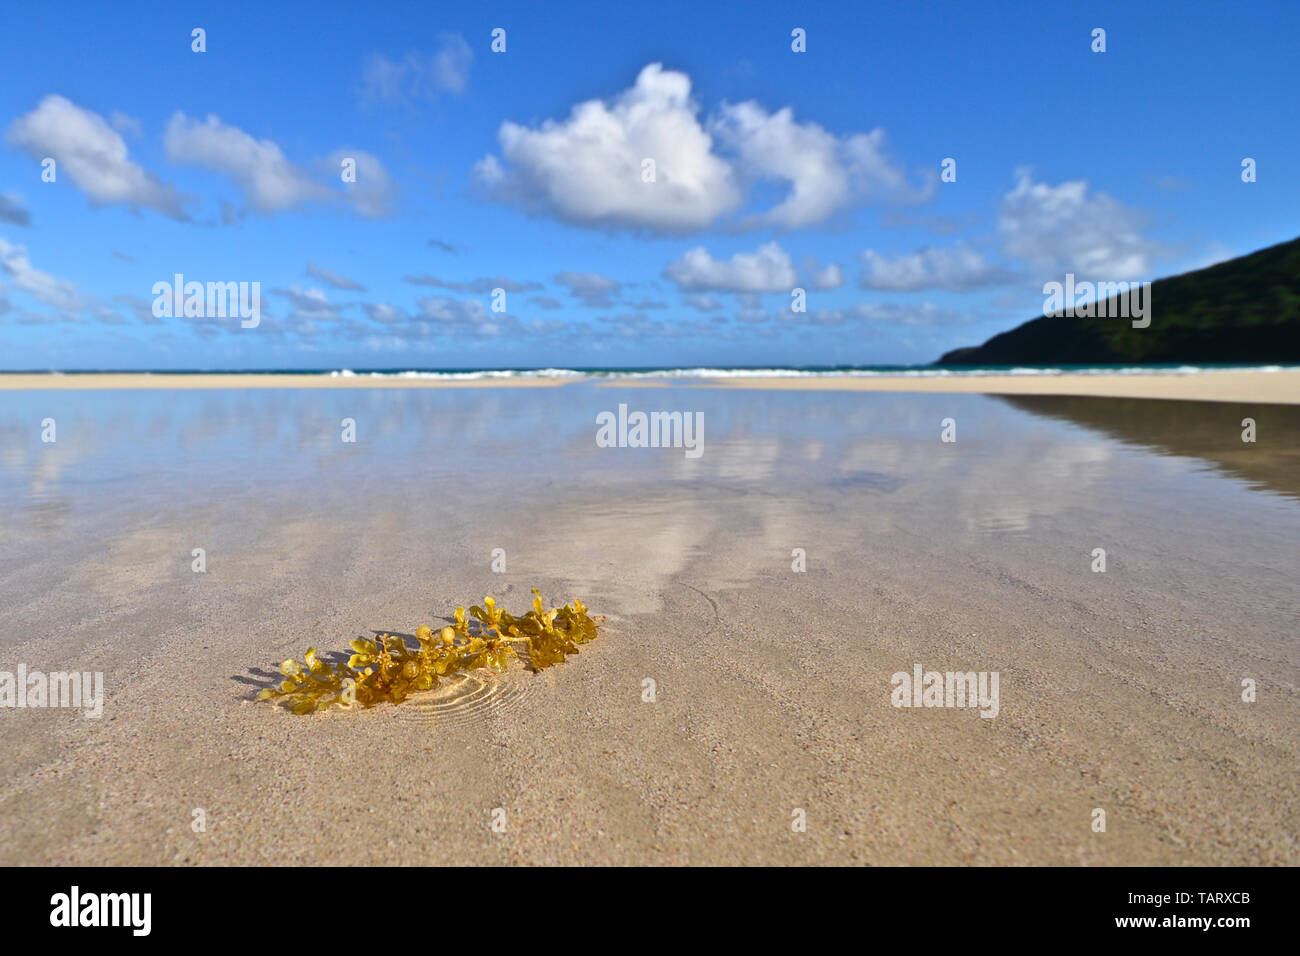 Detail of Flamenco Beach in Culebra Island showing sky reflections on the wet beach sand Stock Photo